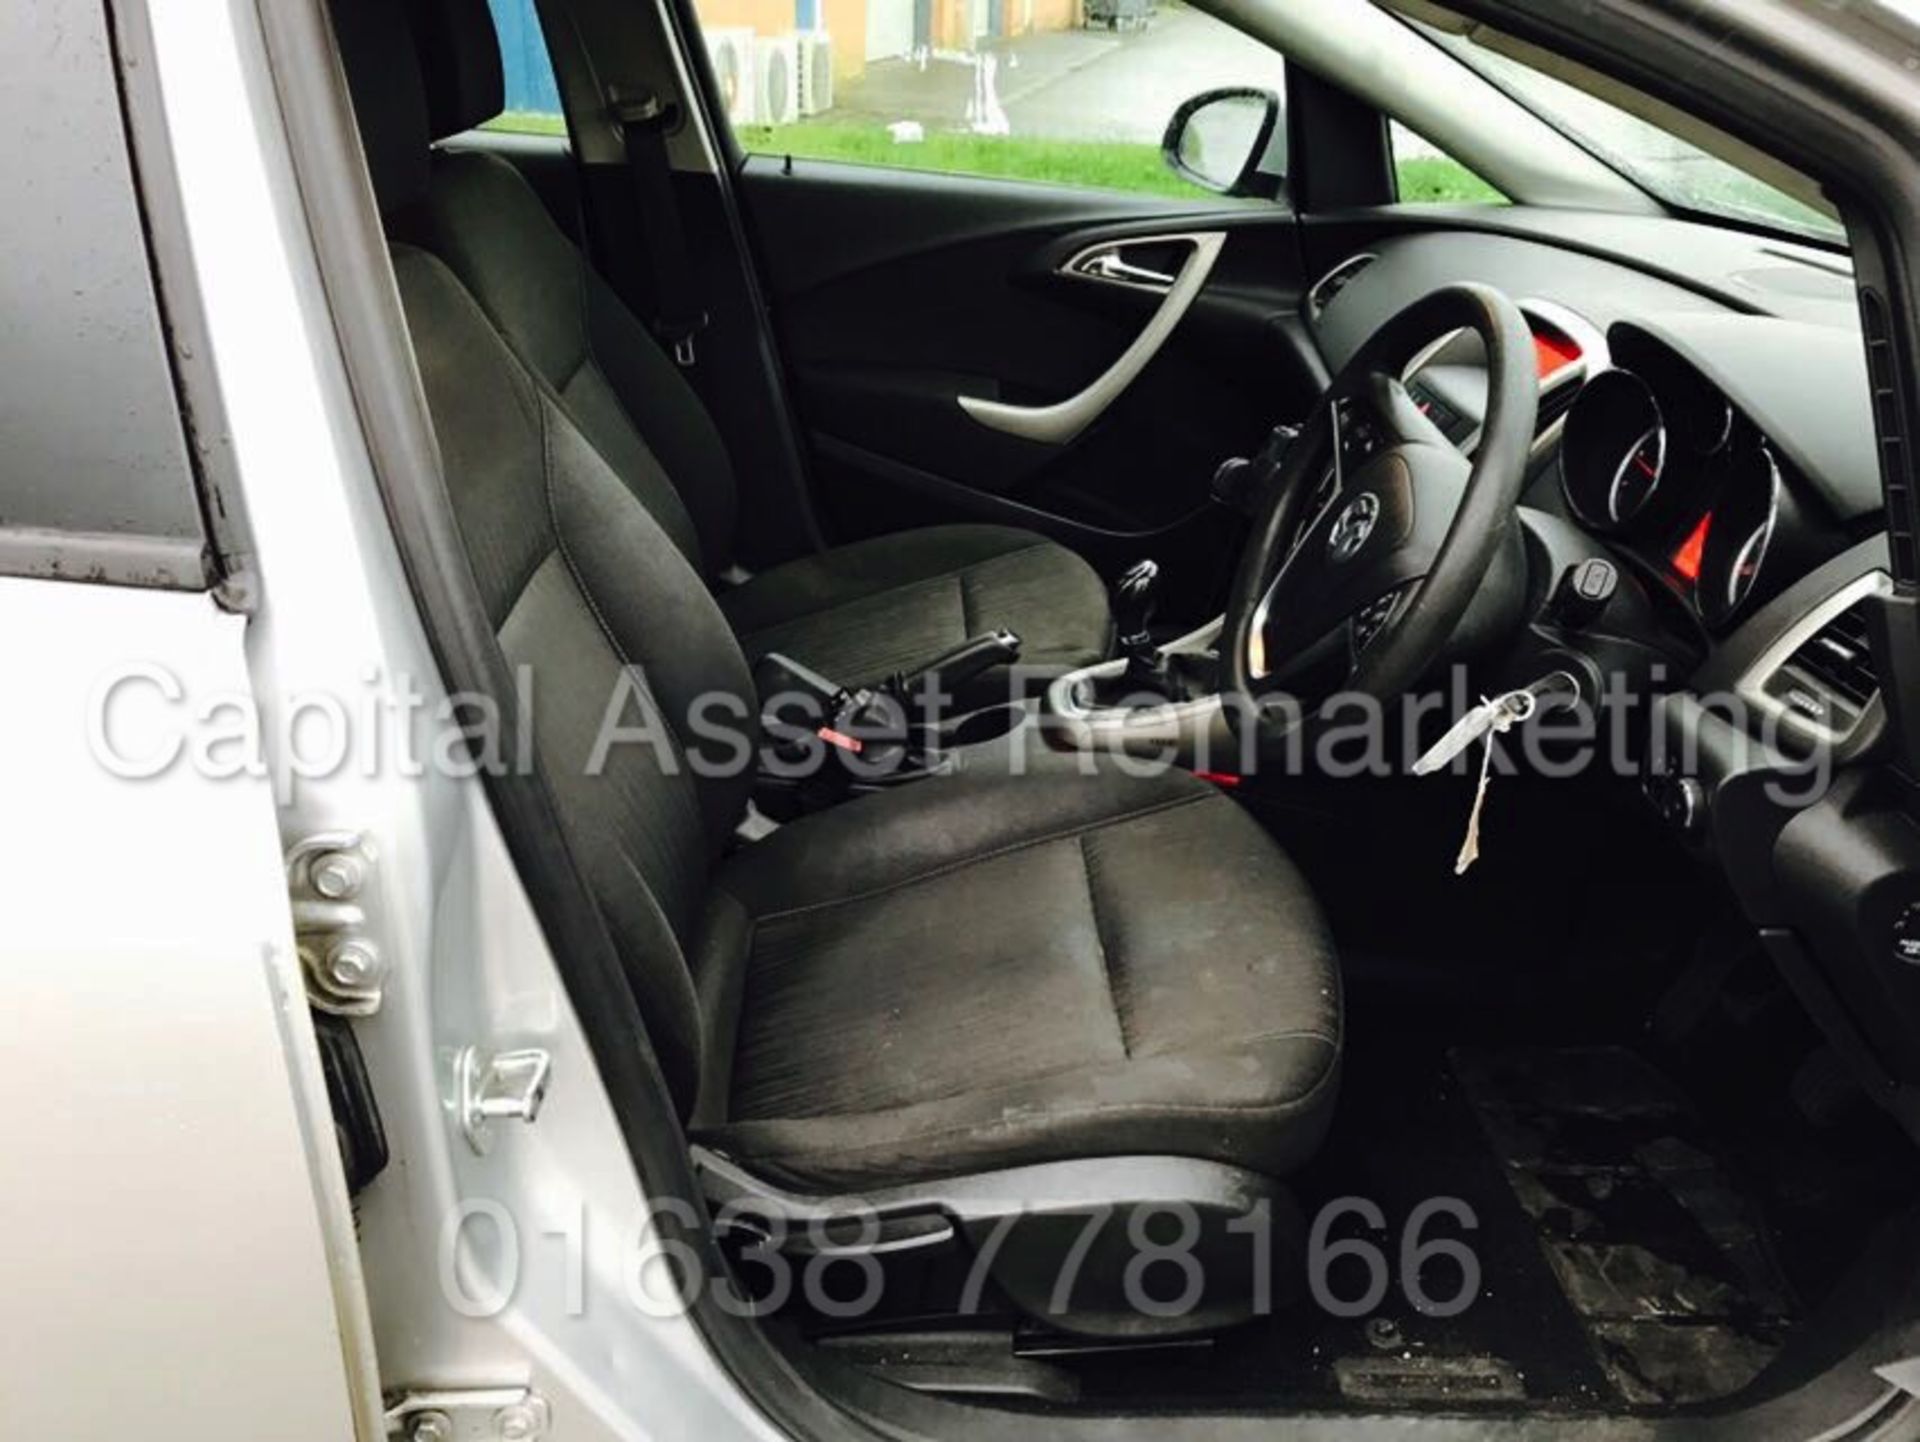 (On Sale) VAUXHALL ASTRA 'EXCLUSIVE' (2012 MODEL) '1.7 CDTI - ECOFLEX - 6 SPEED' *AIR CON* (1 OWNER) - Image 12 of 17